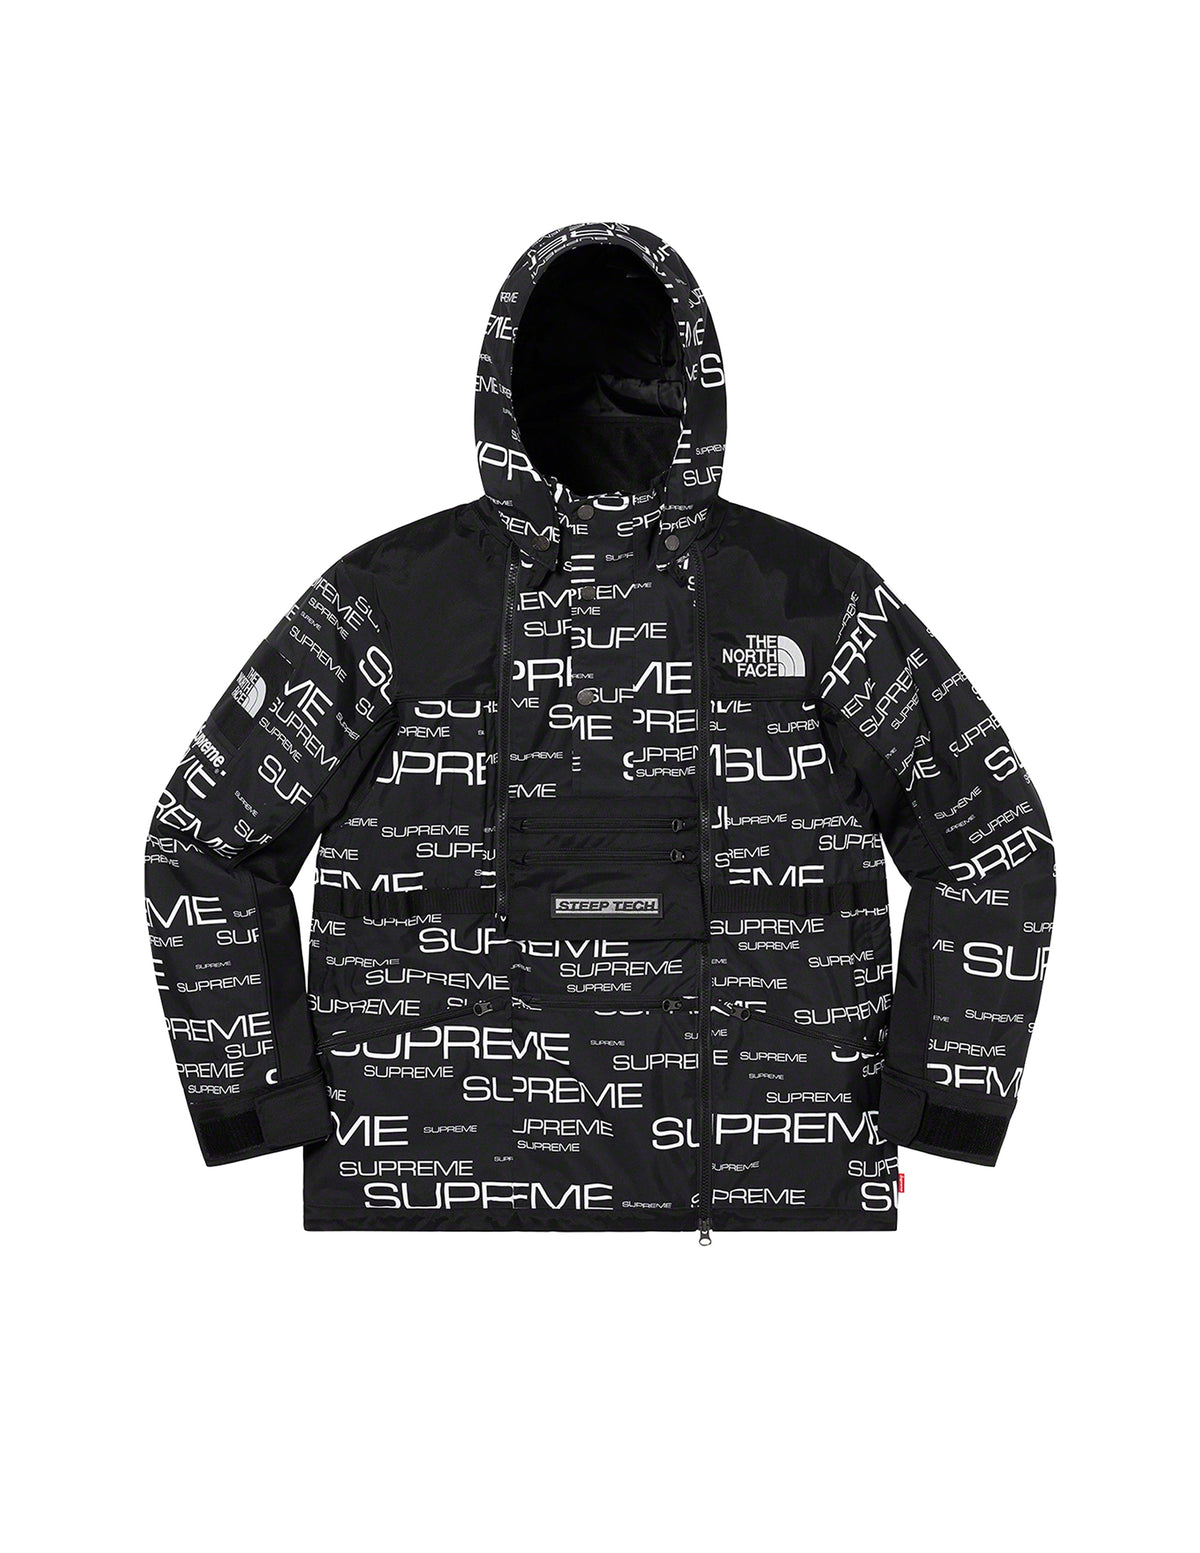 Supreme x The North Face "Steep Tech" Jacket